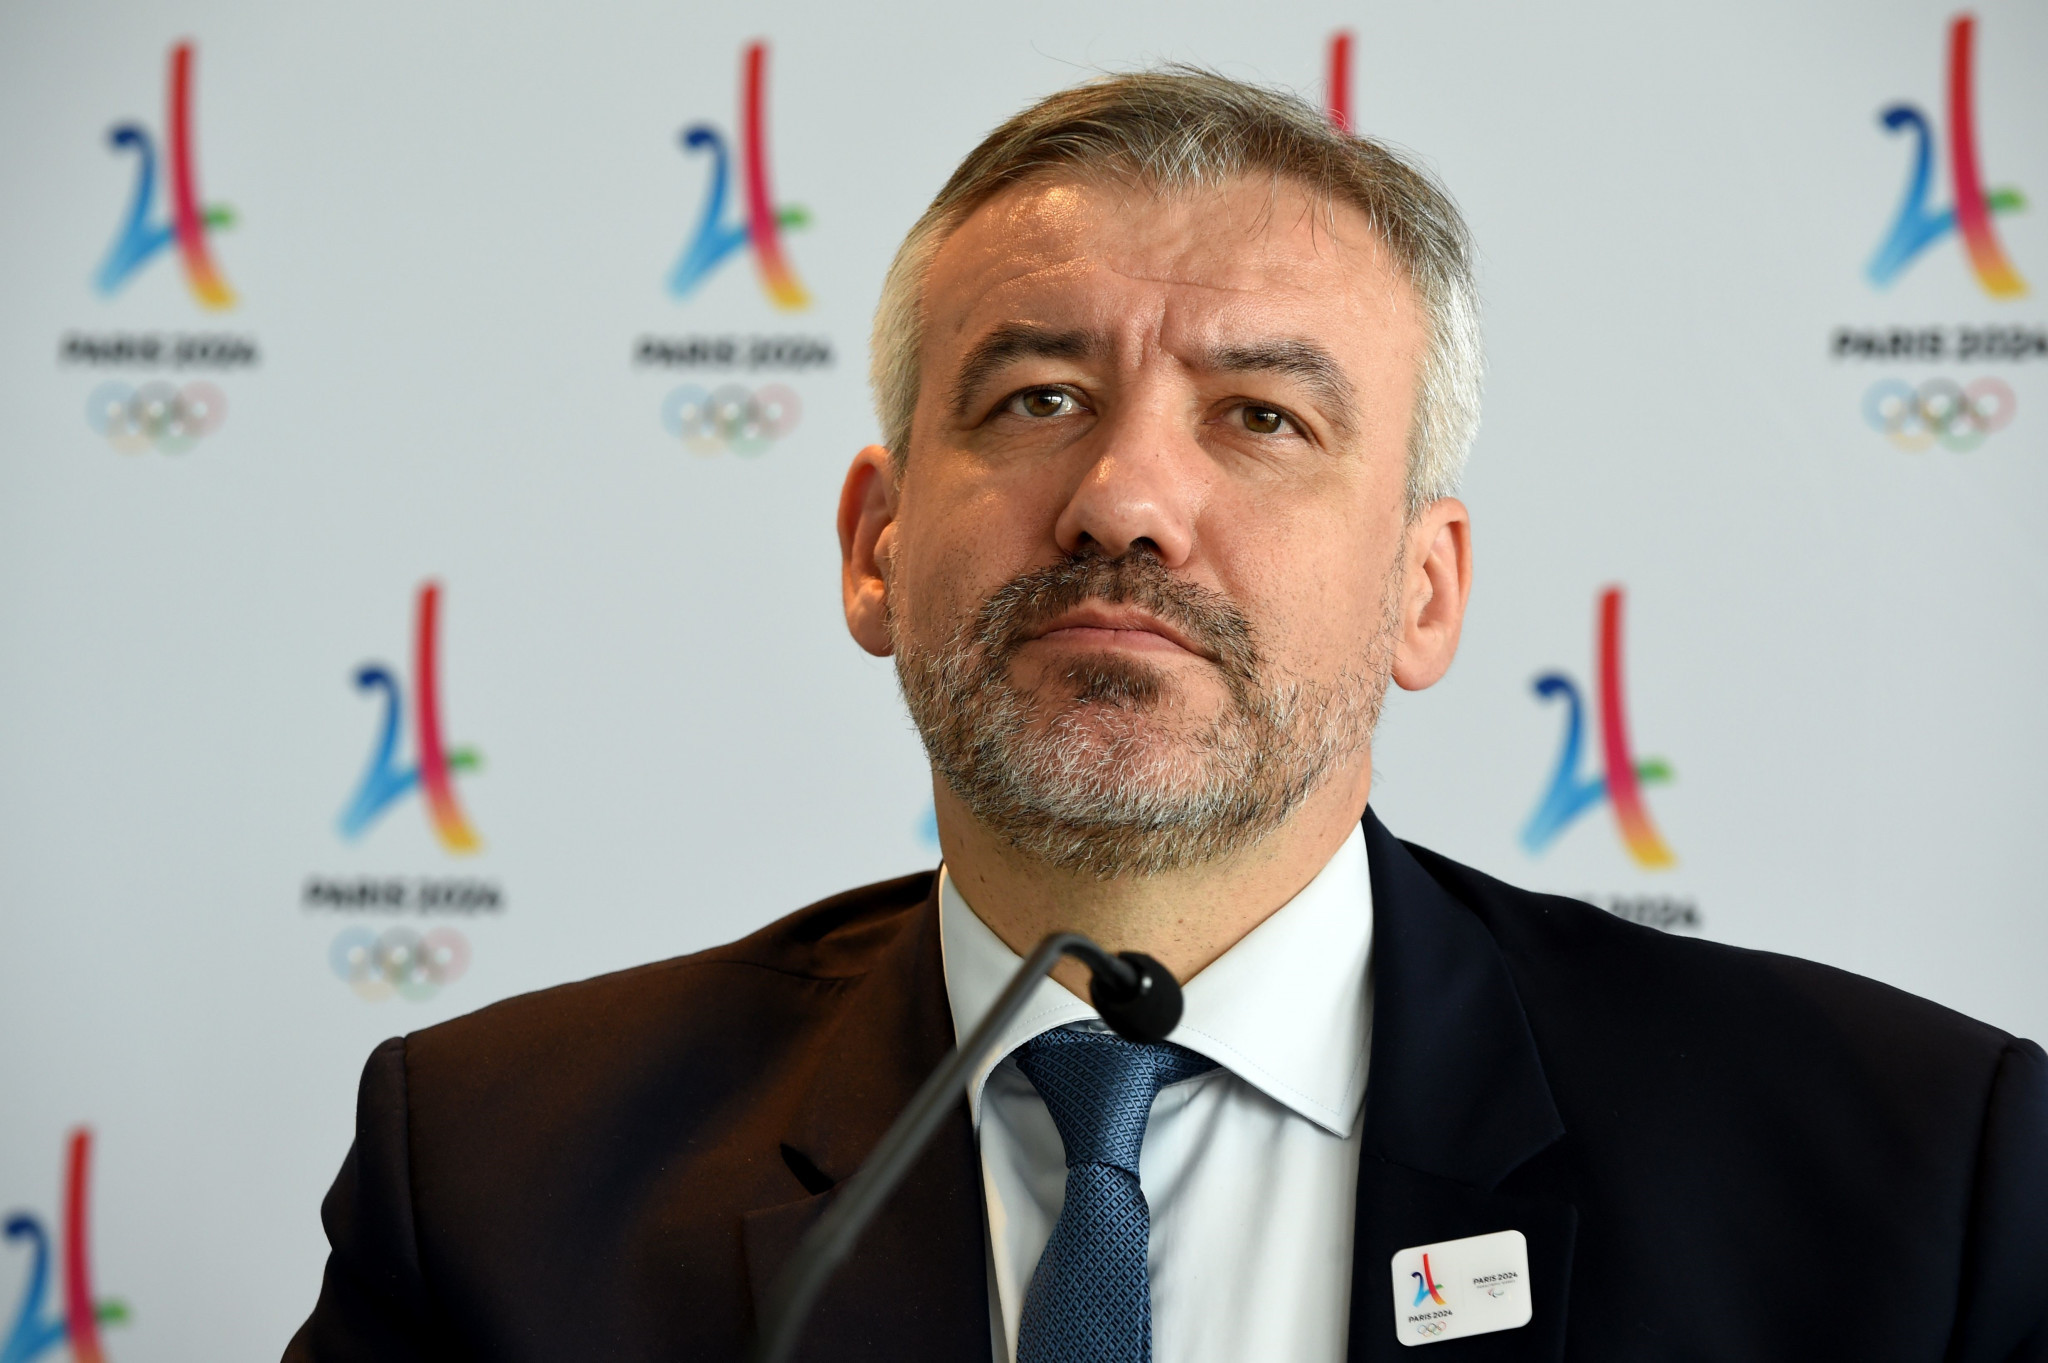 Paris 2024 director general Étienne Thobois insisted the Village will be completed 